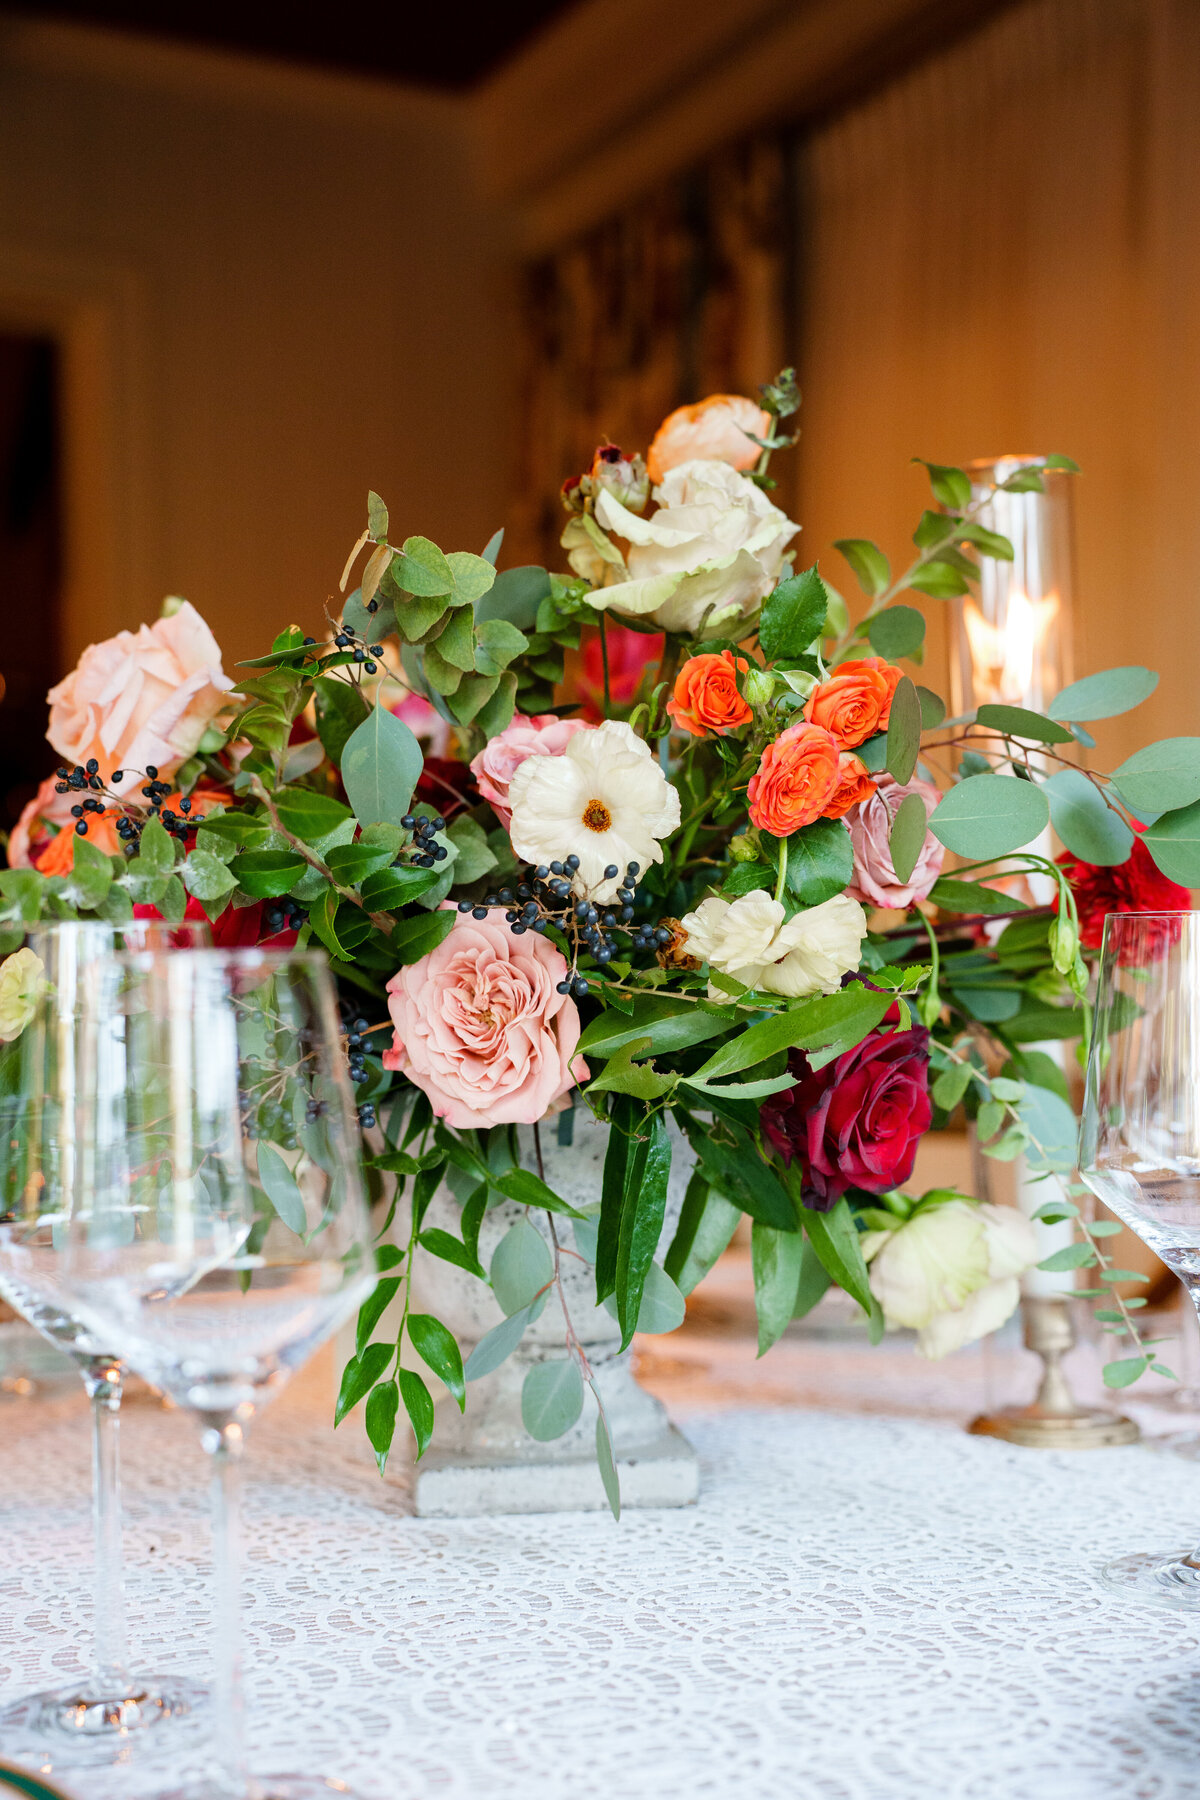 the-finer-things-event-planning-full-wedding-services-columbus-ohio-luxury-dalay-kat